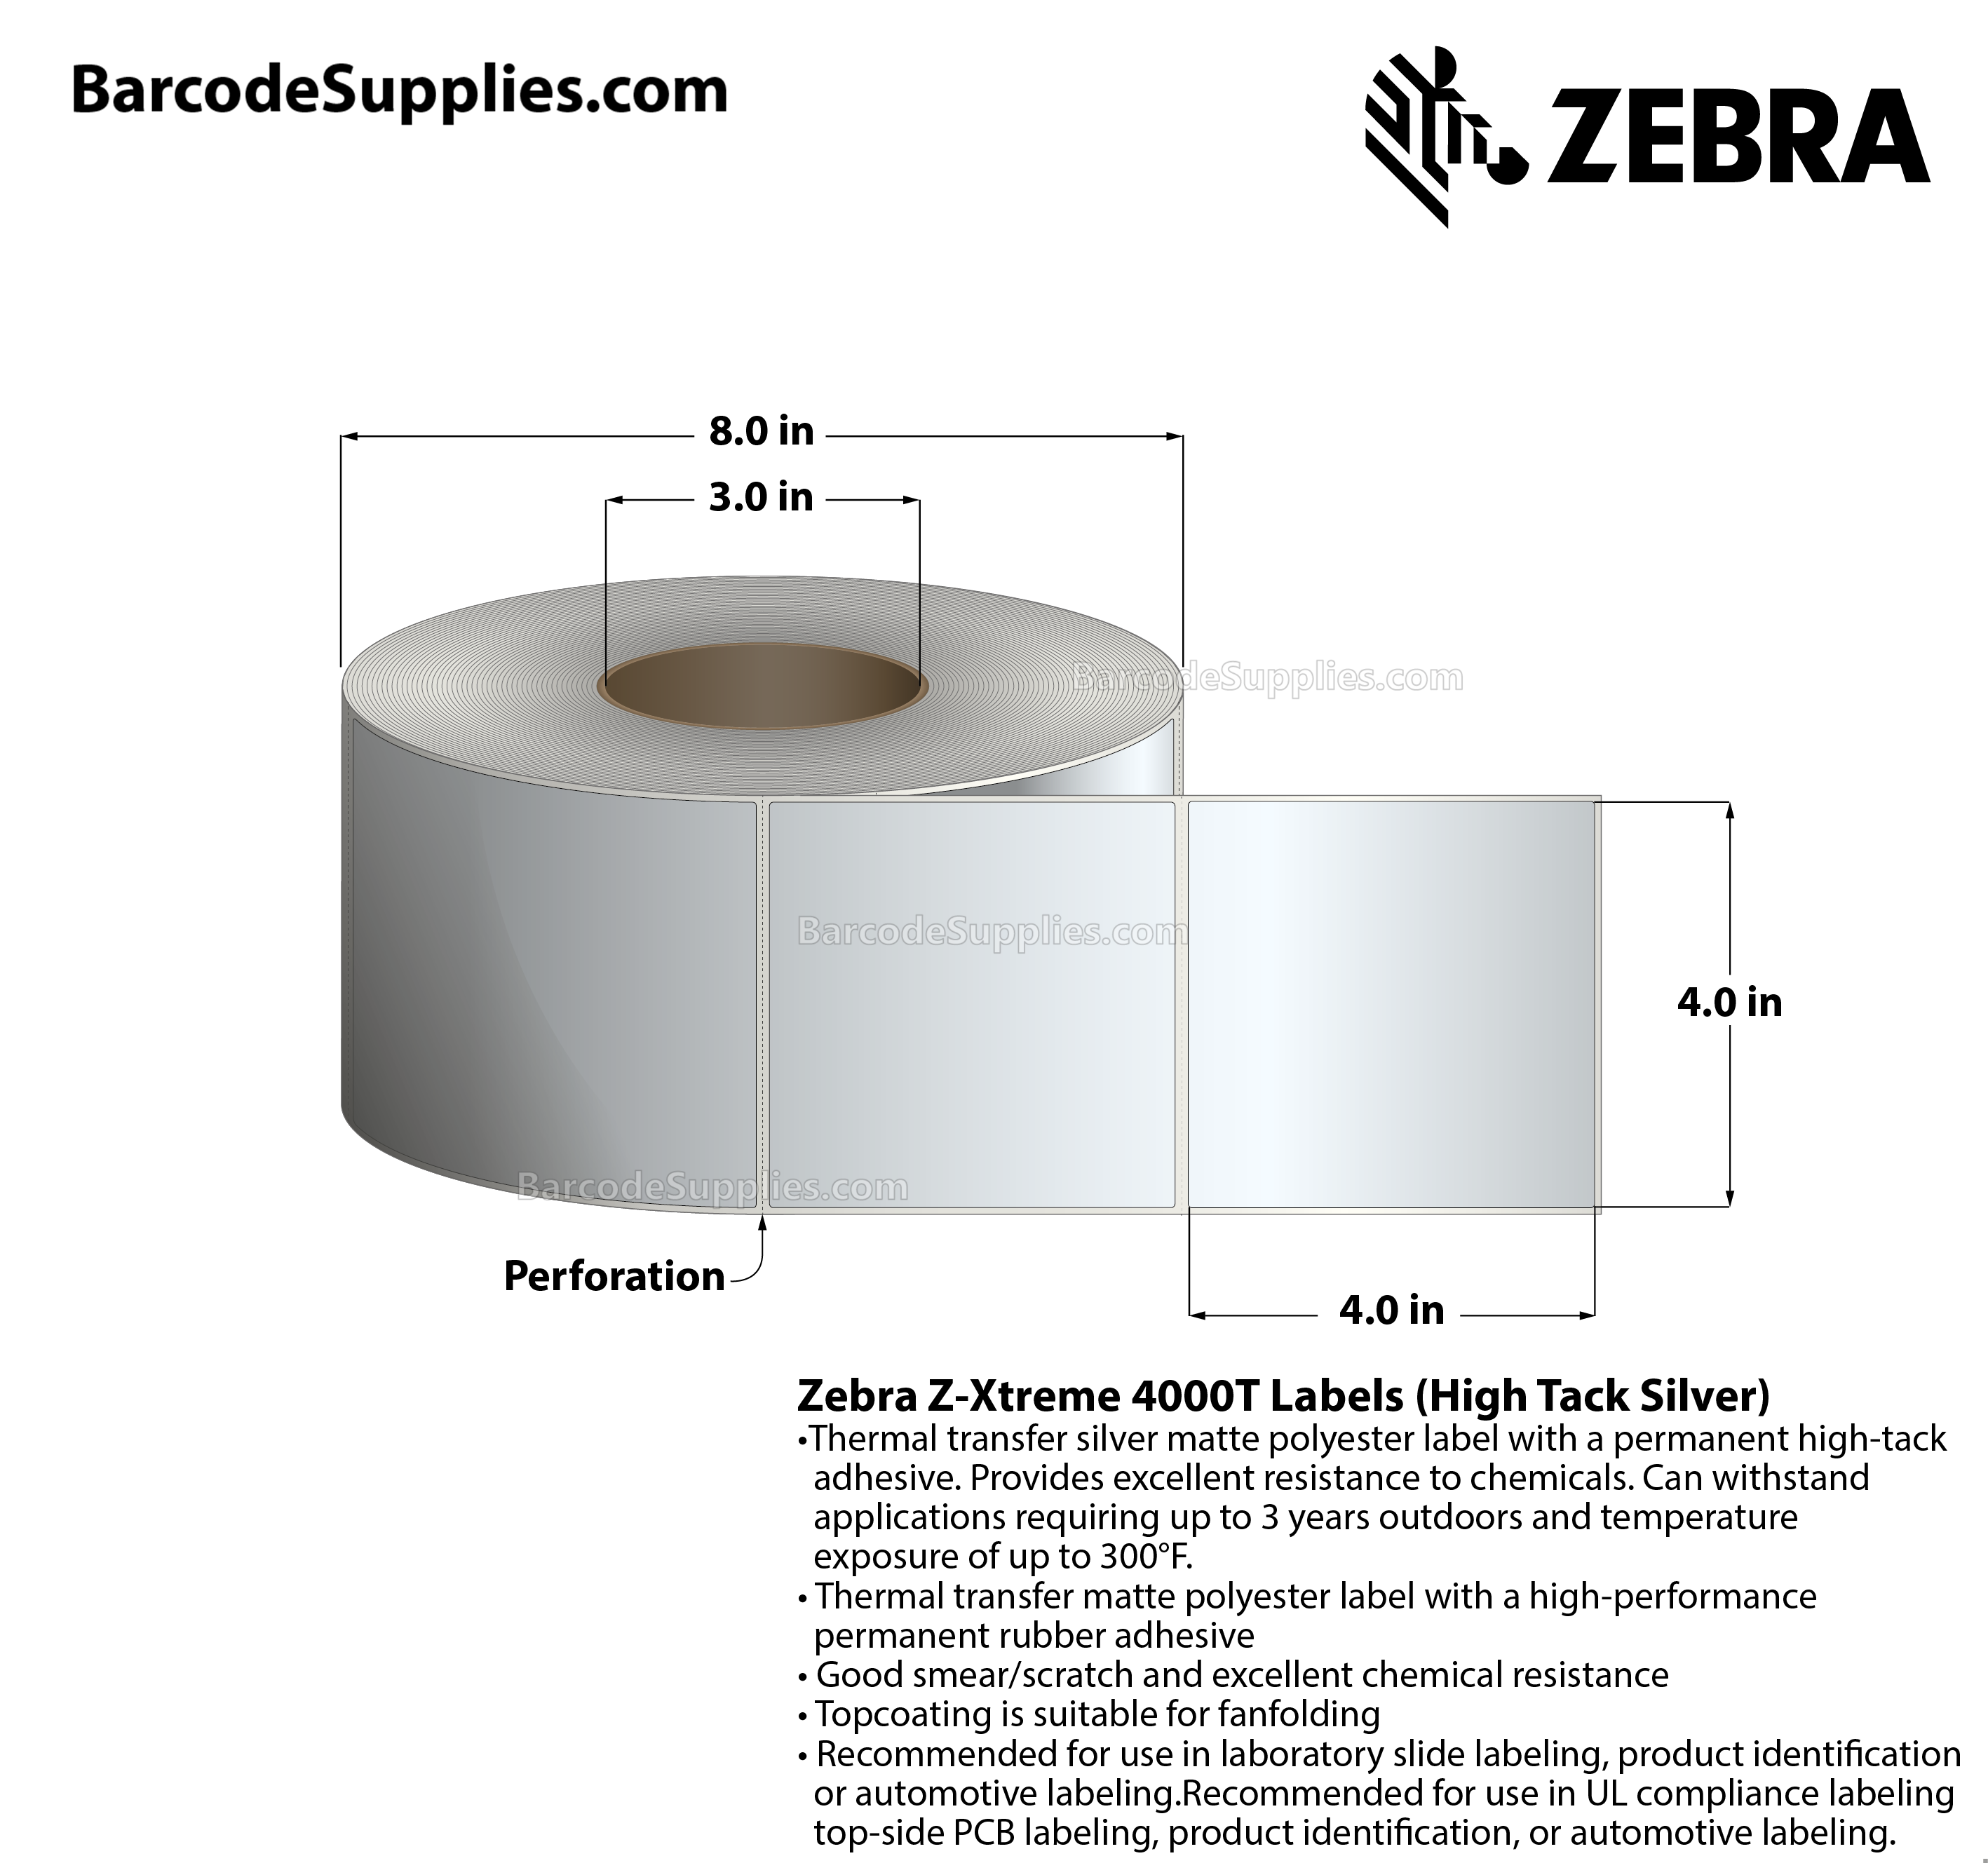 4 x 4 Thermal Transfer Silver Z-Xtreme 4000T High-Tack Silver Labels With High-tack Adhesive - Perforated - 1000 Labels Per Roll - Carton Of 1 Rolls - 1000 Labels Total - MPN: 10023183